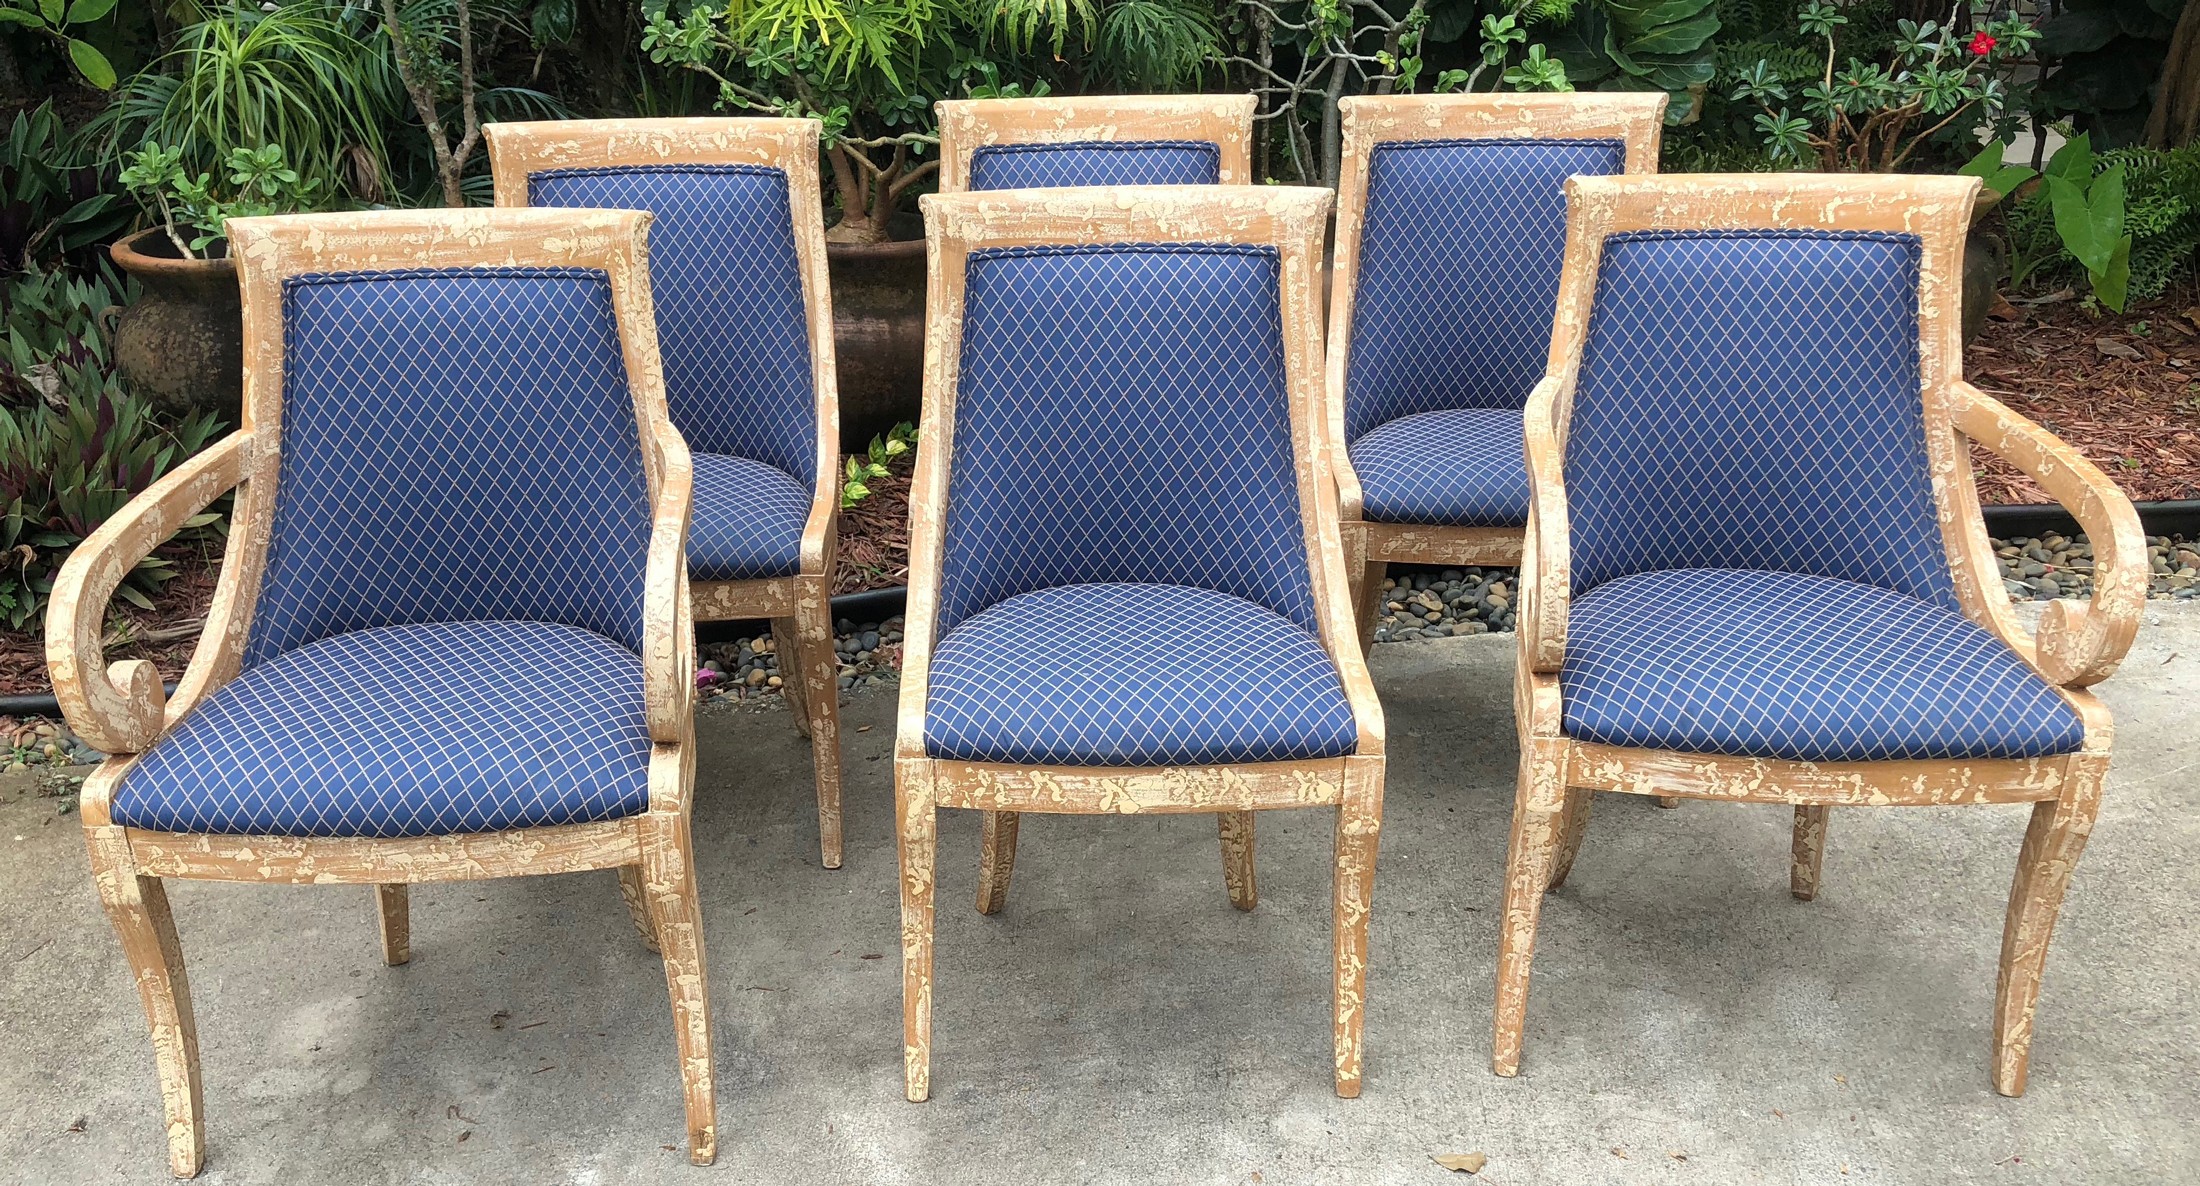 Crackle Finish Chairs (set of 6)